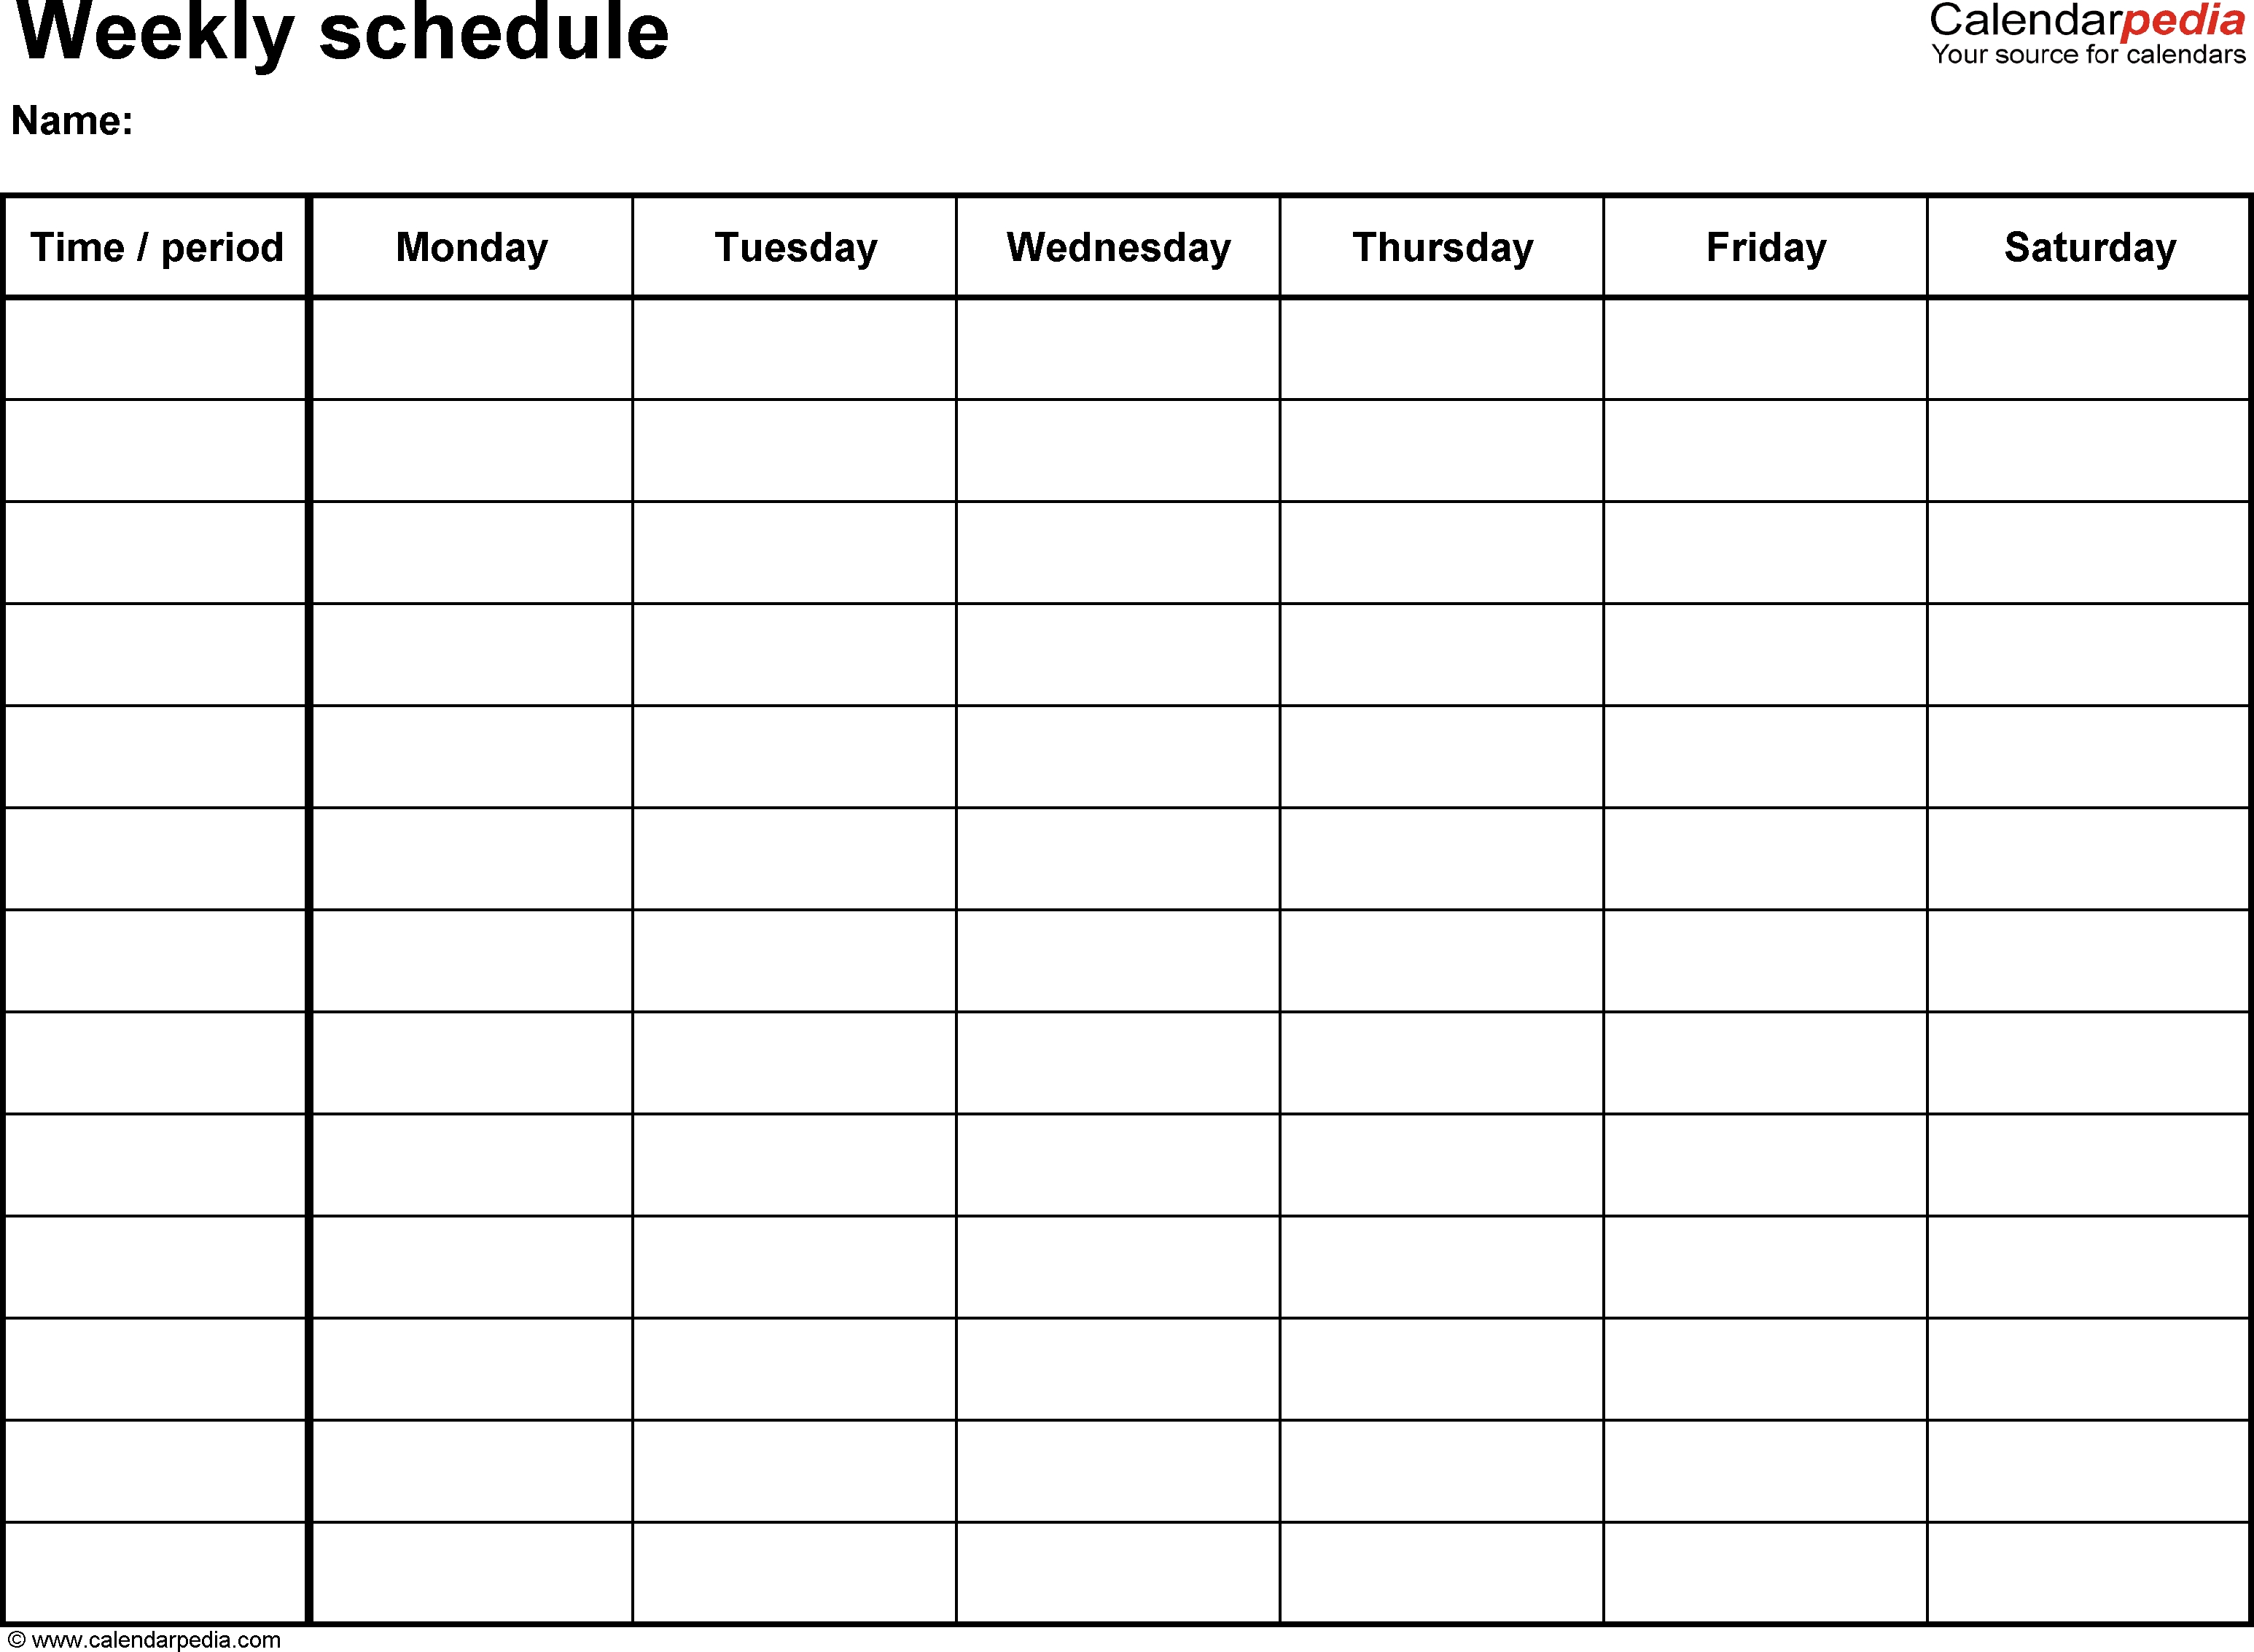 Free Weekly Schedule Templates For Word - 18 Templates with regard to Microsoft Calendar Template Five Day